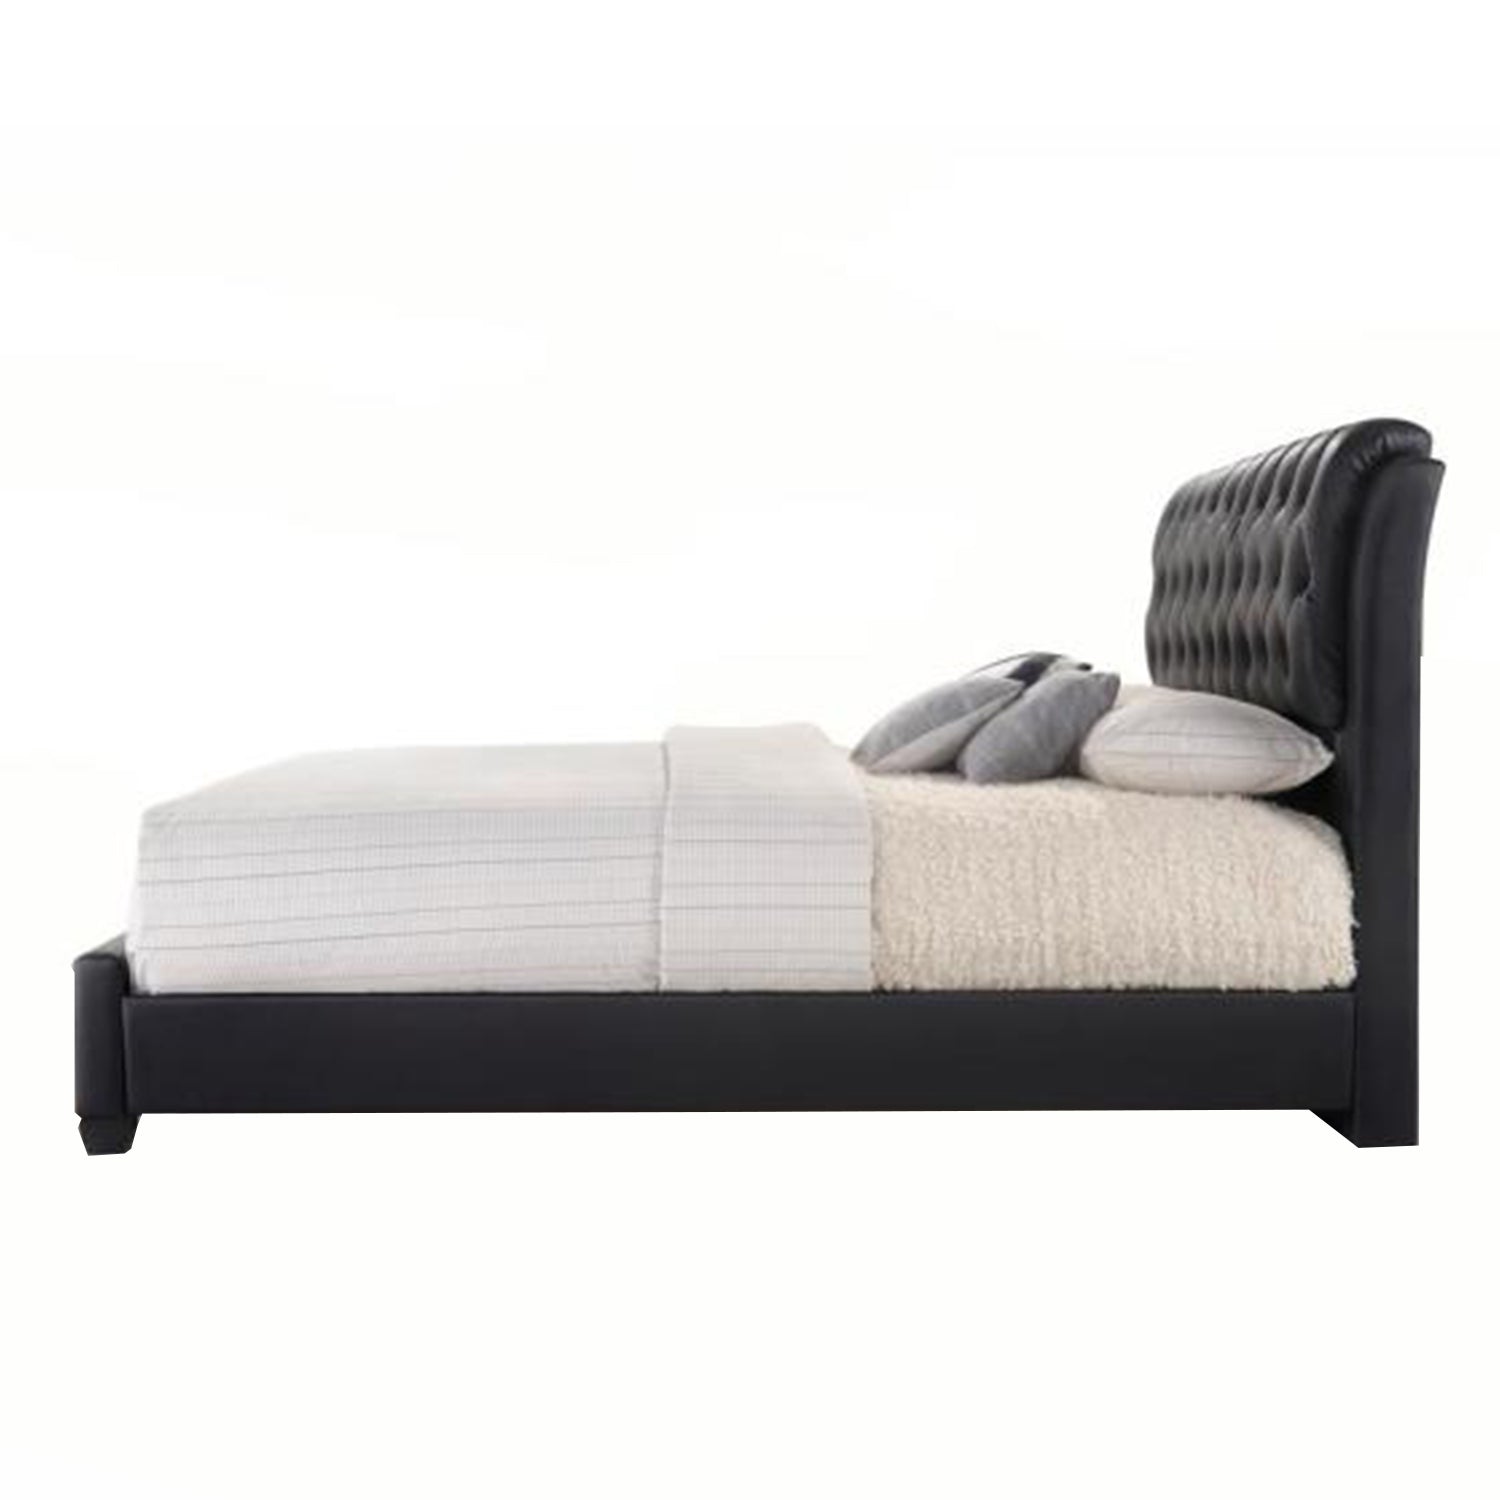 90" X 79" X 49" Black Pu Button Tufted King Bed Default Title